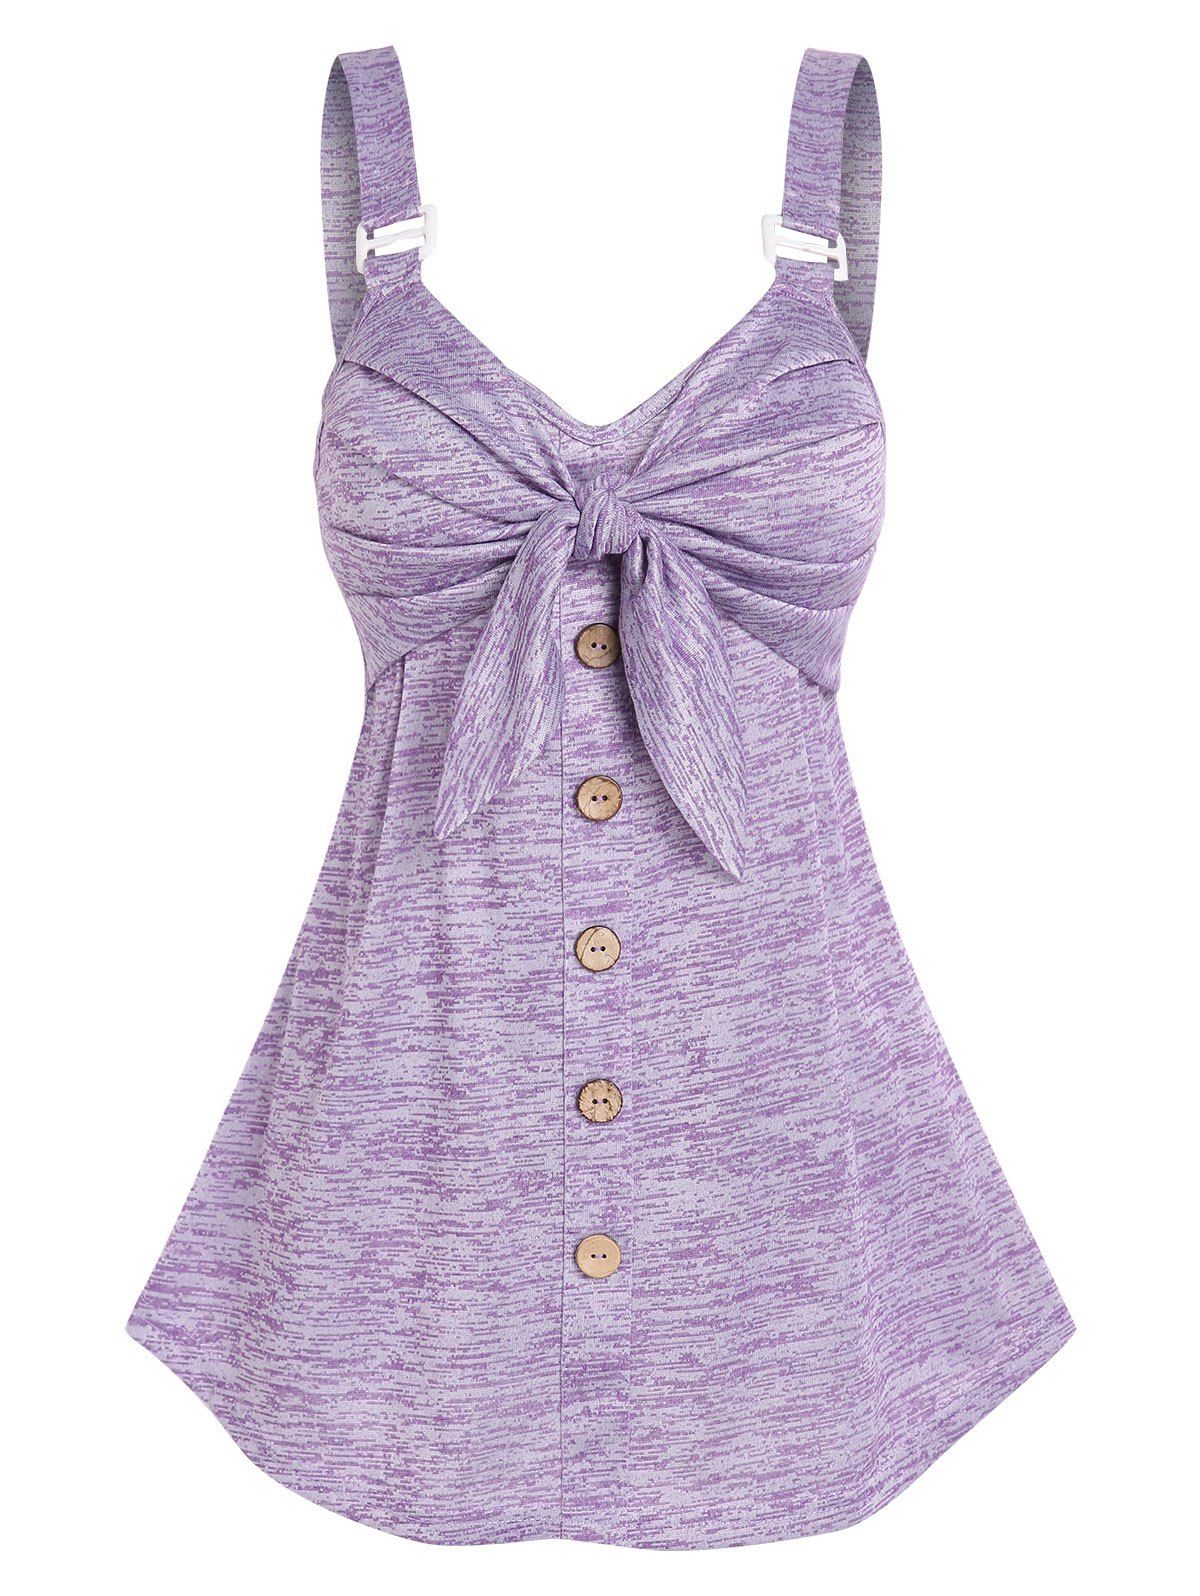 Space Dye Knotted Empire Waist Buttoned Front Skirted Casual Tank Top - PURPLE XXXL